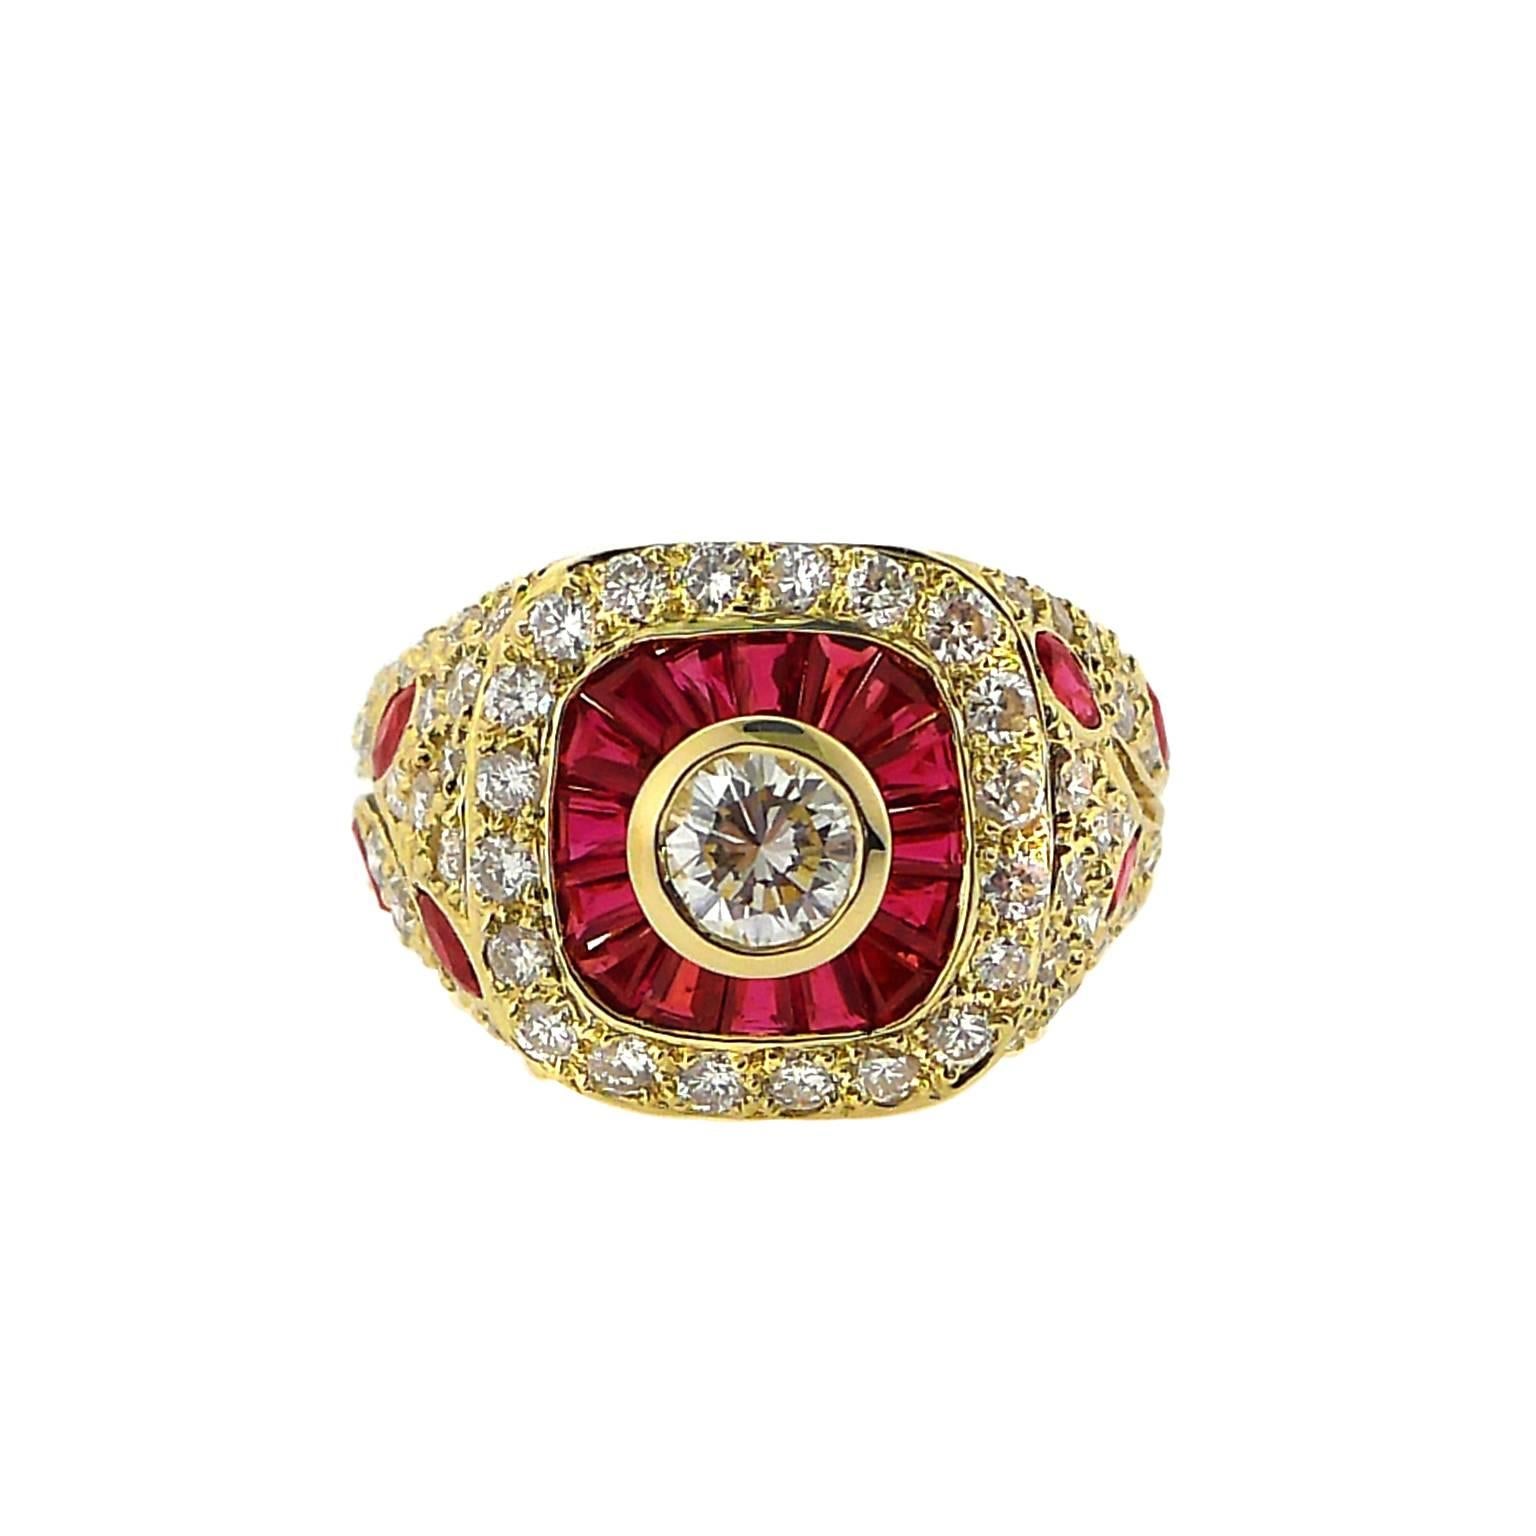 63 diamonds total 1.46 carats.  Rubies total approximately 1.90 carats.
Channel, bezel and pave set.  Ring is a size 6 and can be sized for an additional charge.